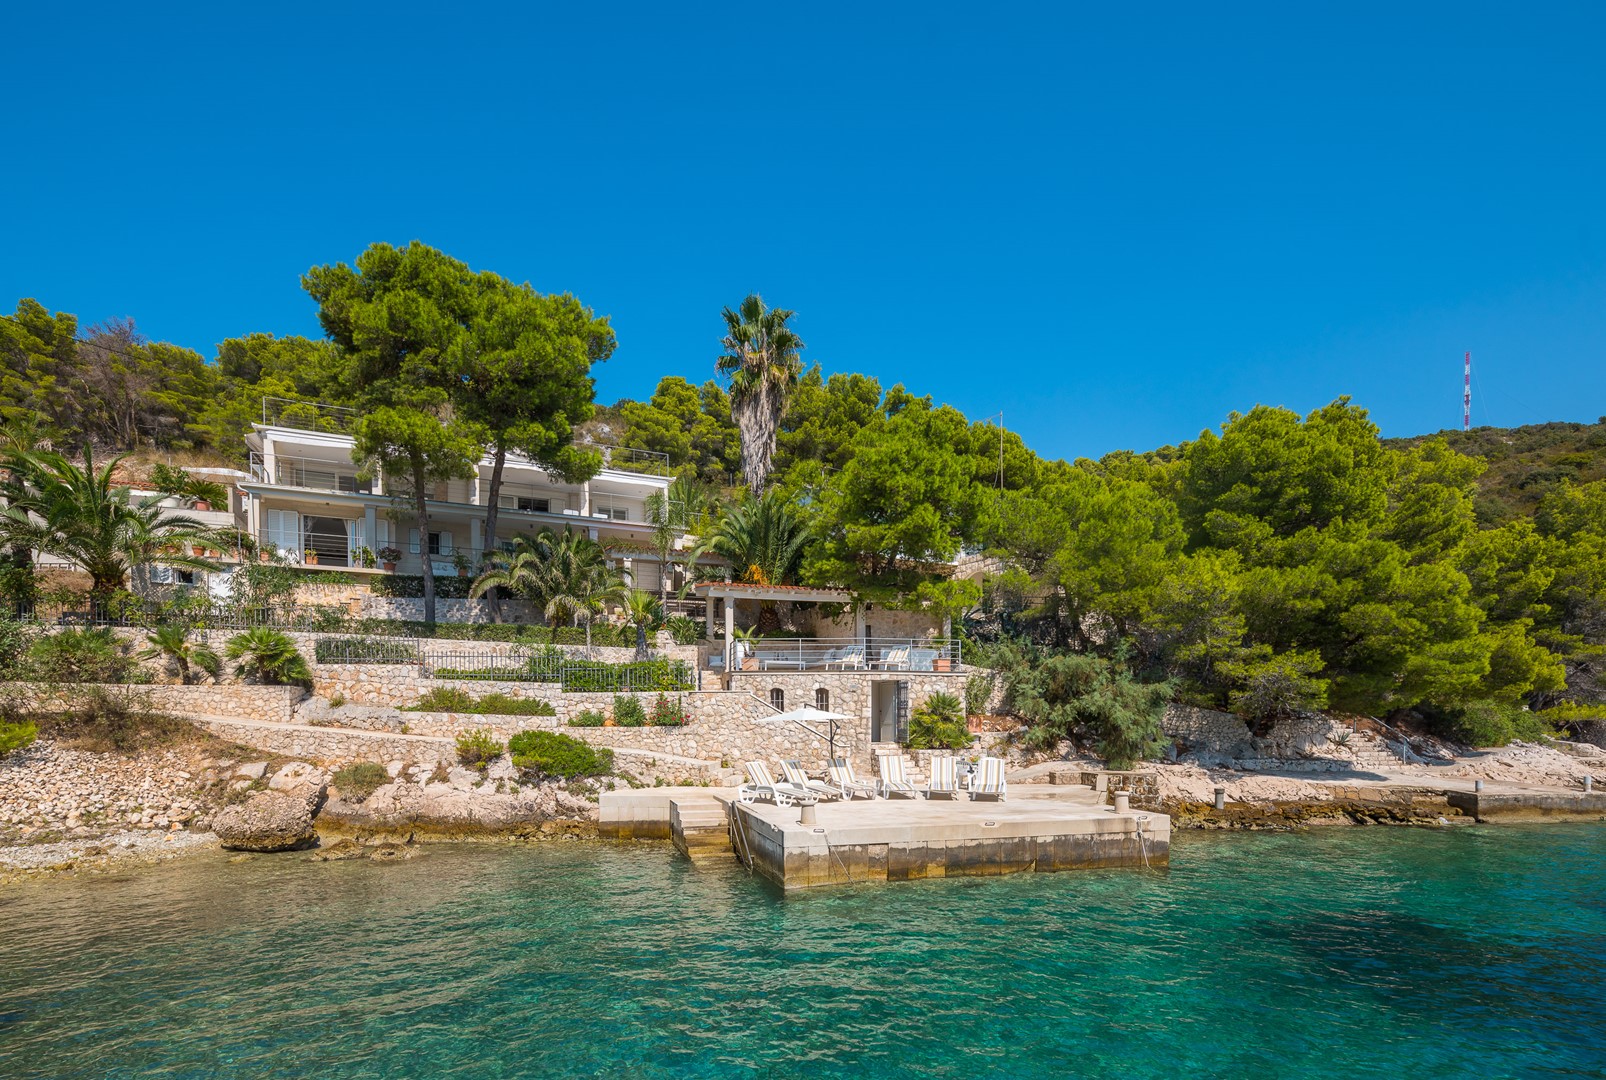 View of Croatia luxury holiday villa Anemos with private pool on the beach on the island of Hvar